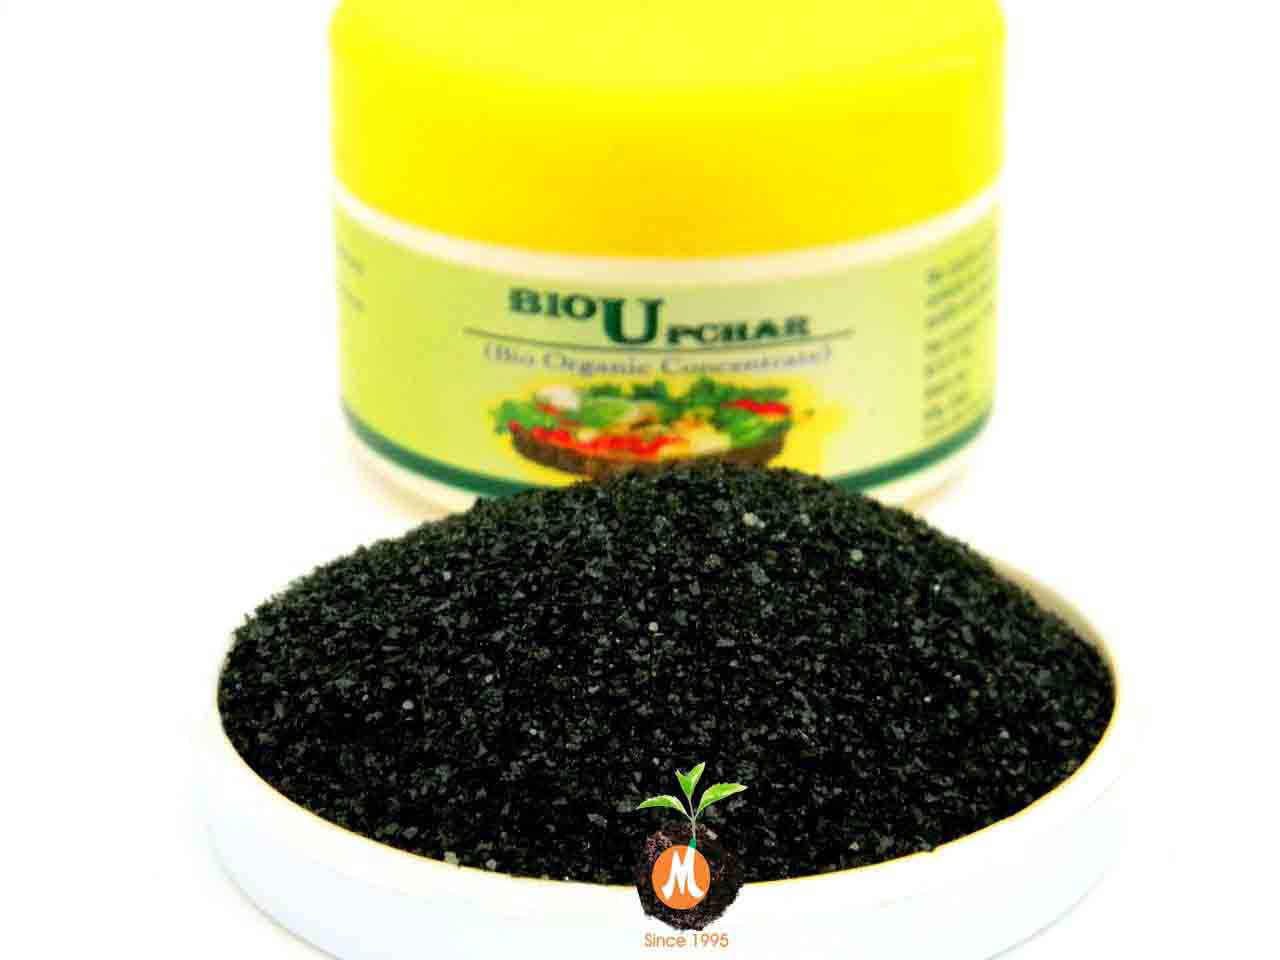 Bio Organic Concentrate by New Malwa Agritech Corporation